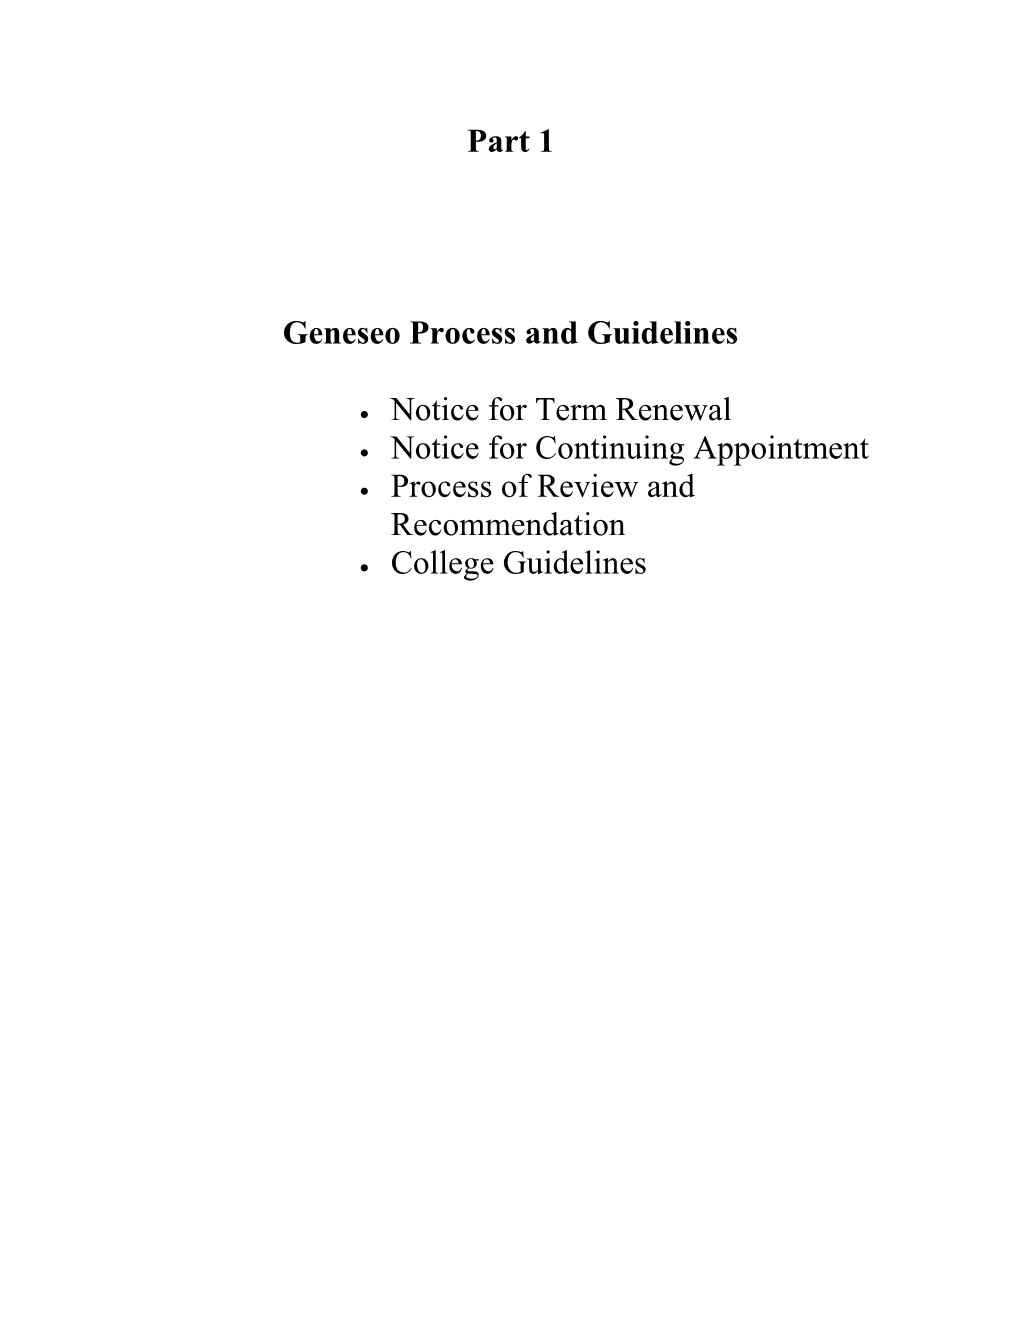 Geneseo Process and Guidelines